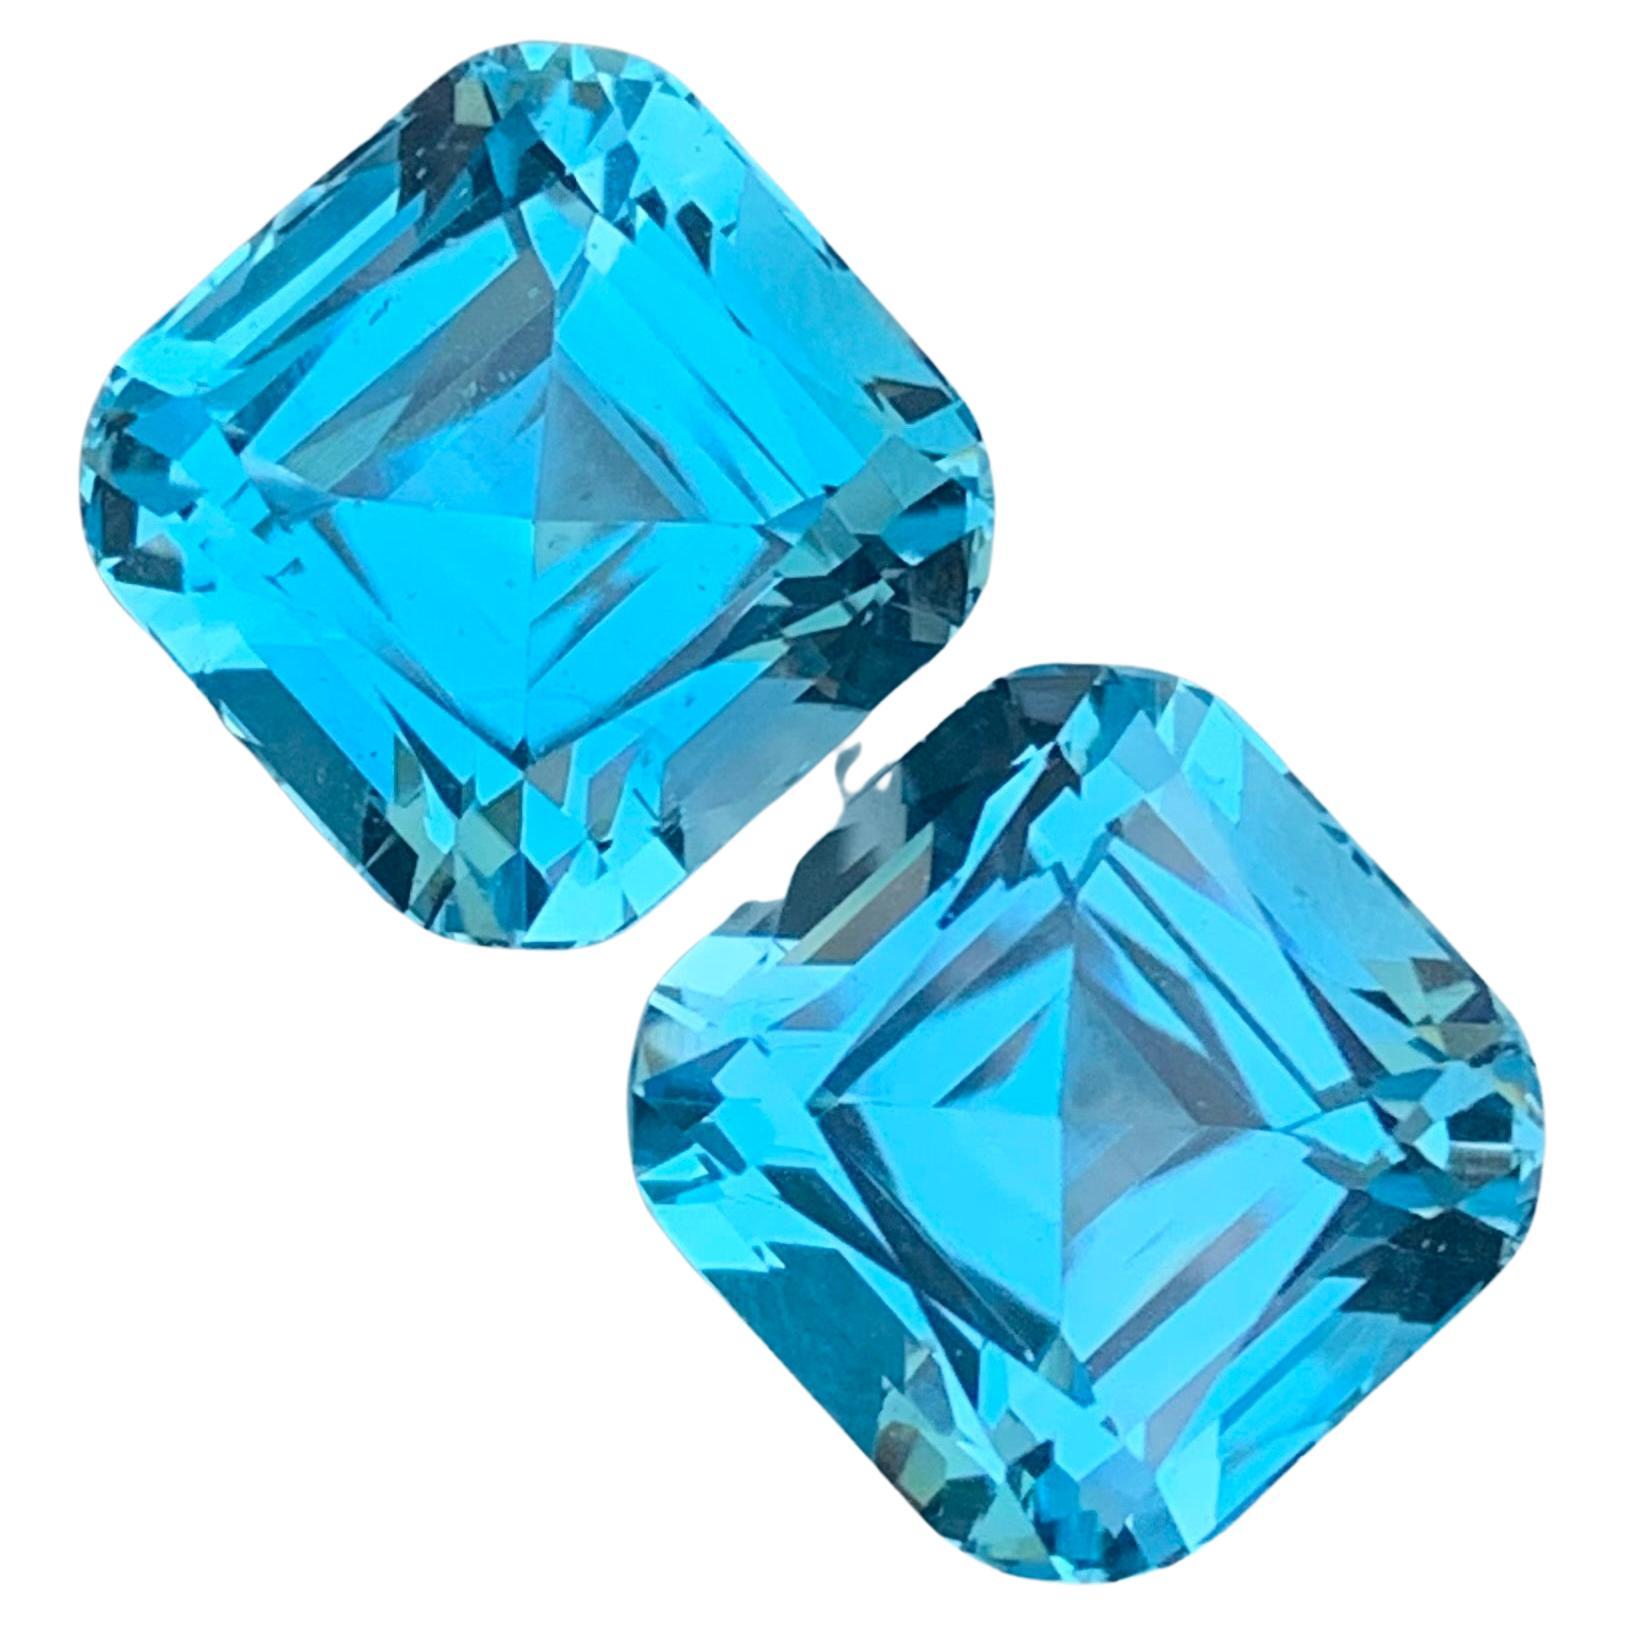 Exceptional Gorgeous Loose Sky Blue Topaz Pairs 25.40 Carat For Earrings Jewelry For Sale